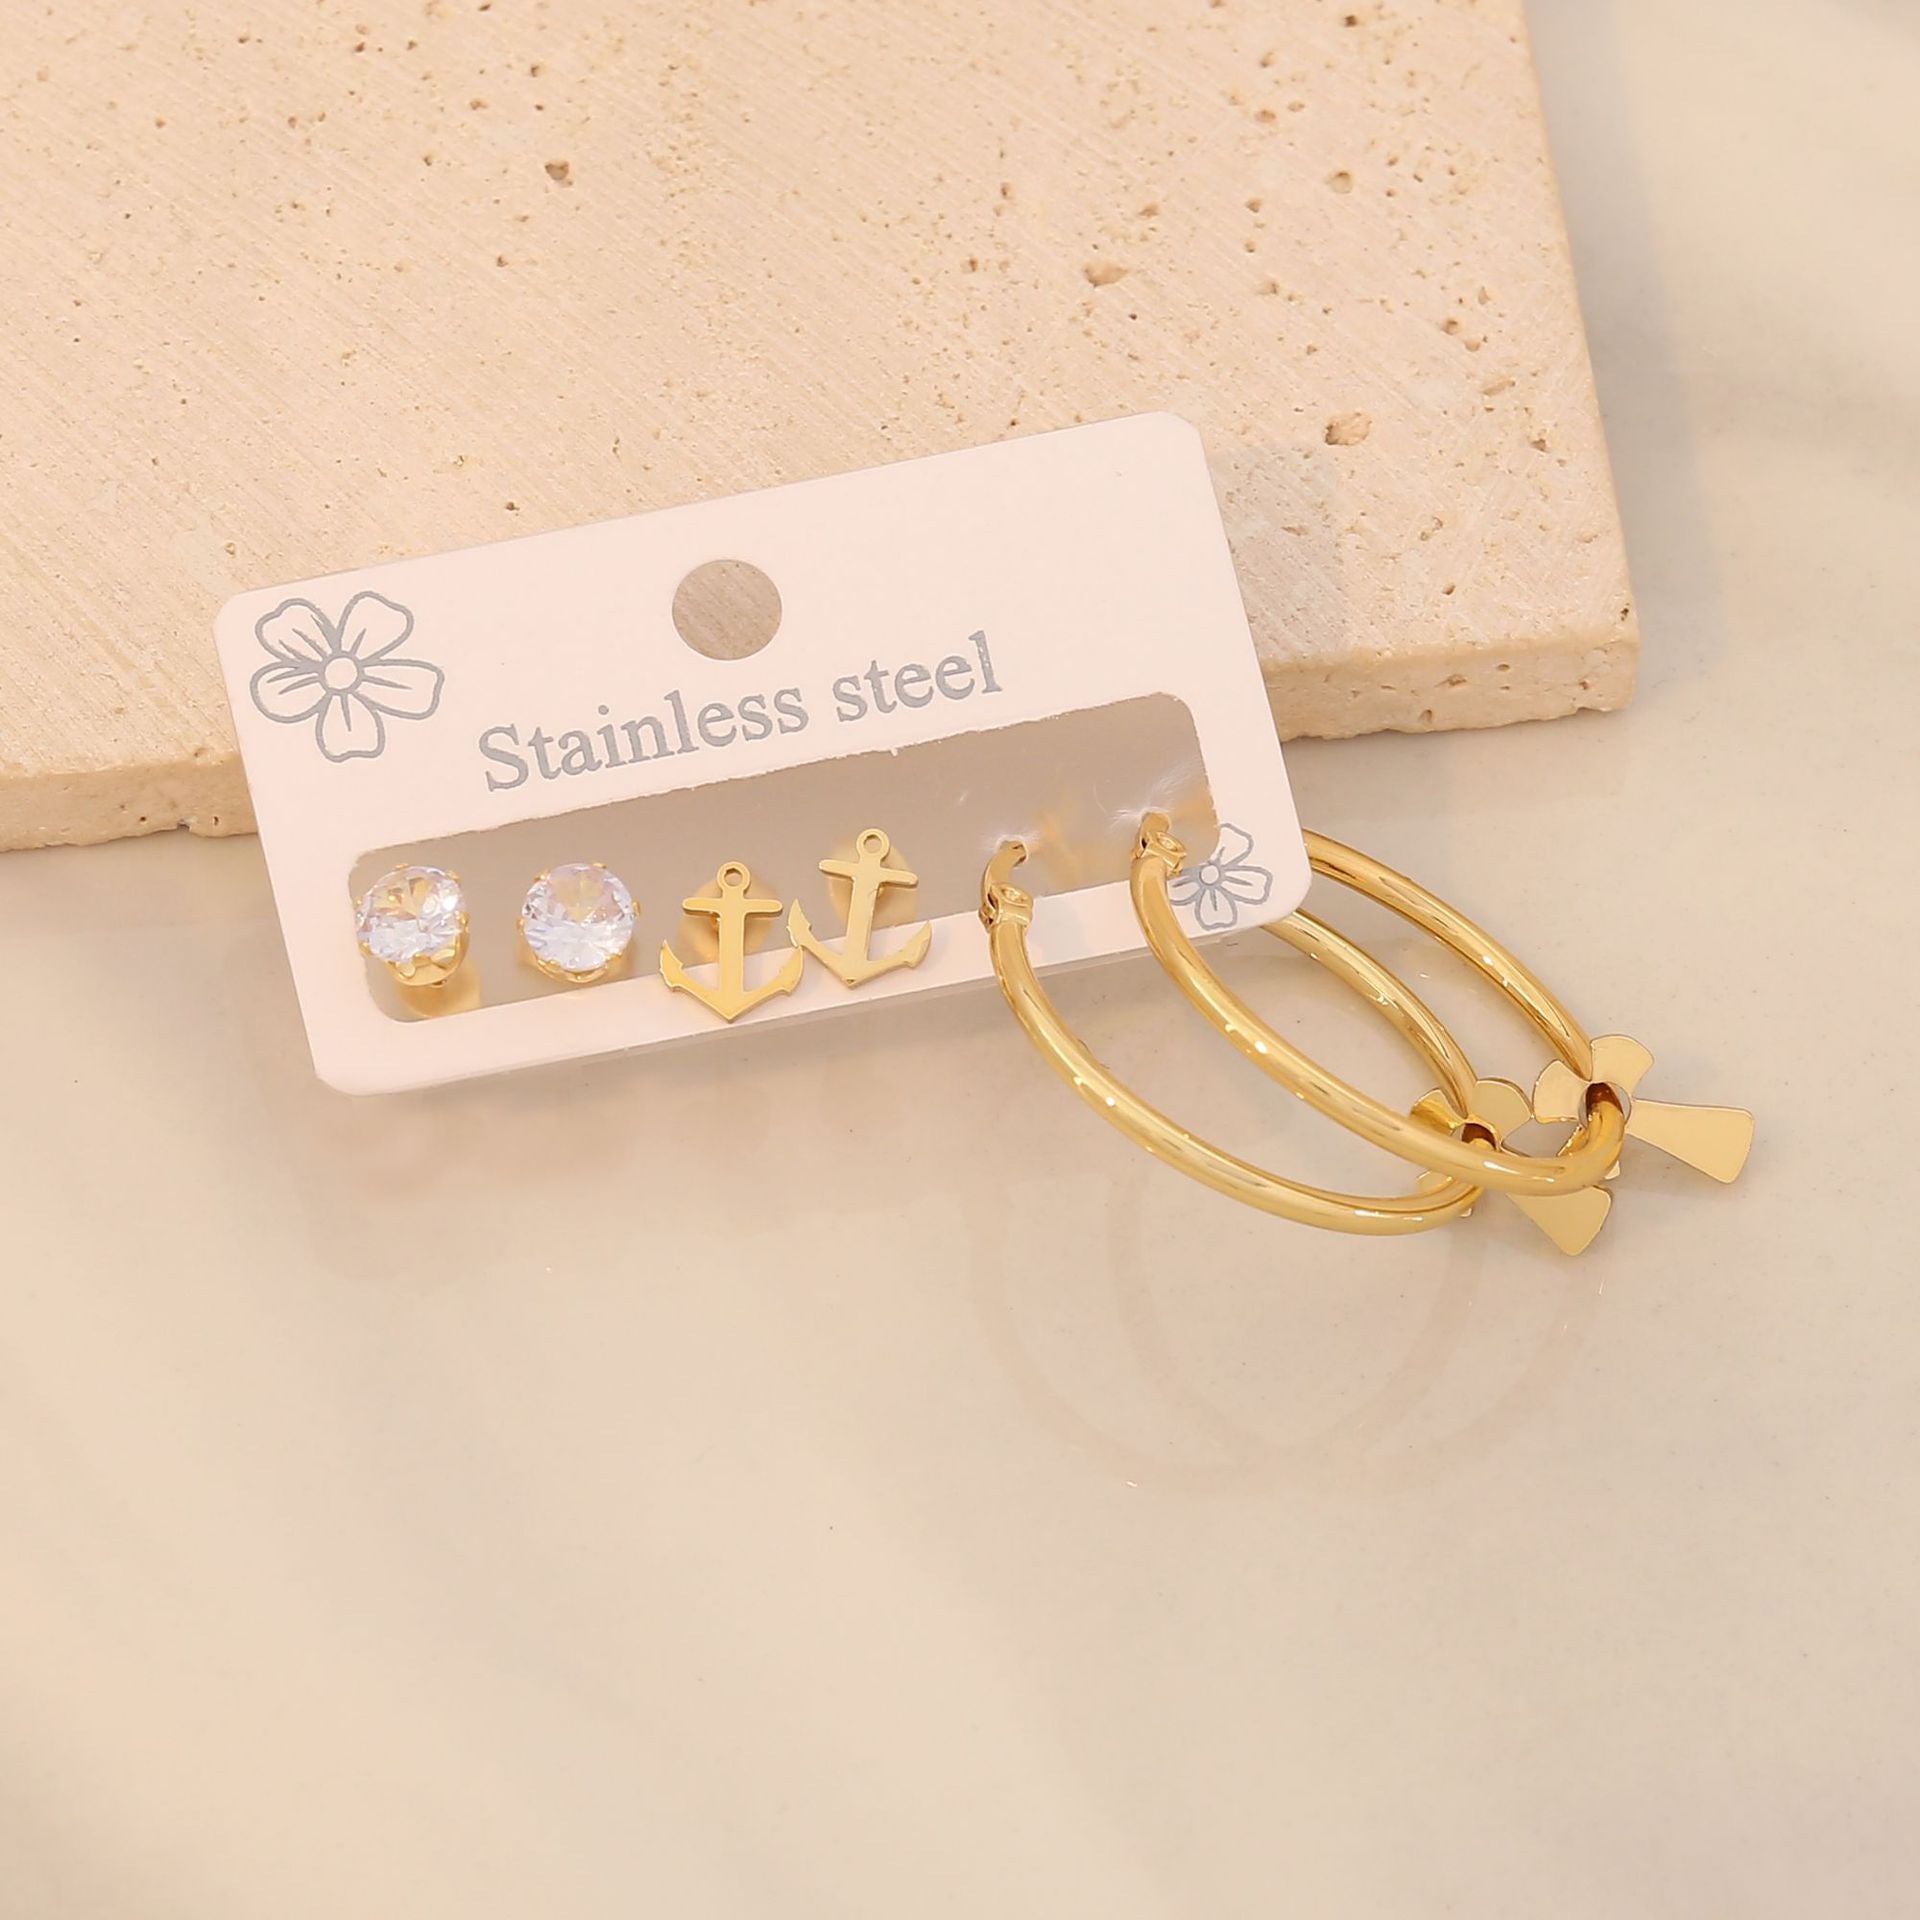 3 Piece Gold-Plated Stainless Steel Earrings